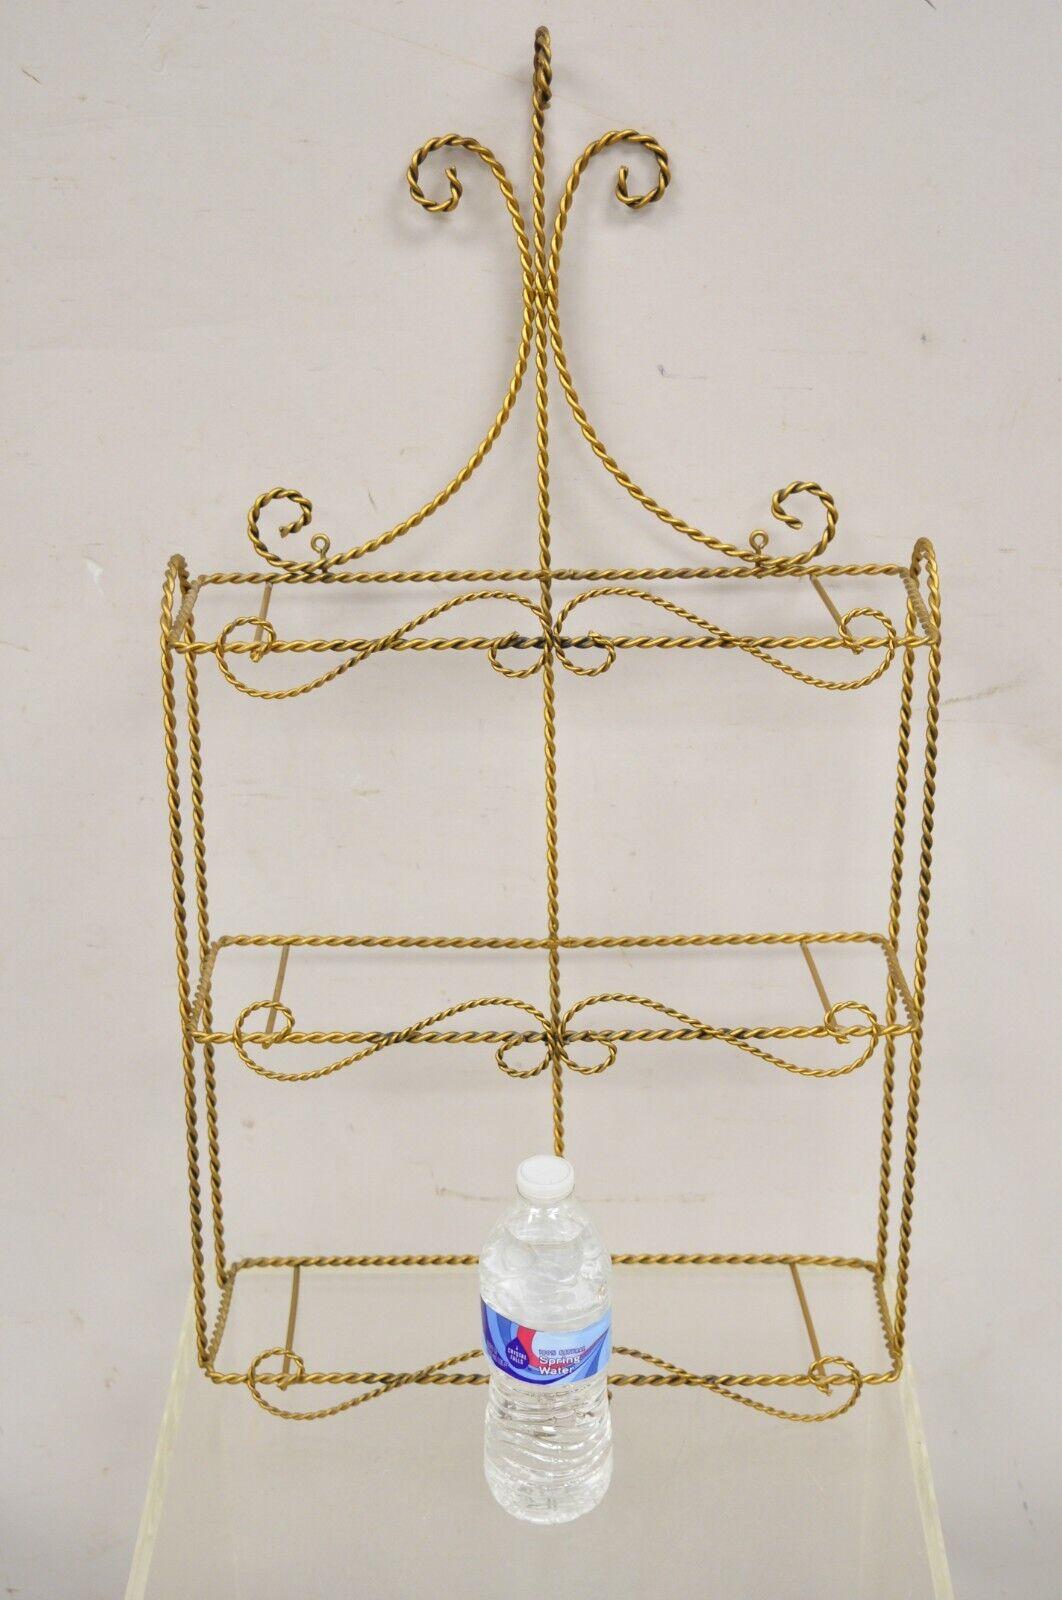 Vintage Gold Gilt Metal Hollywood Regency Scrolling Iron 3 Tier Small Wall Shelf with 3 Glass shelves. Circa Mid to Late 20th Century. Measurements: 28